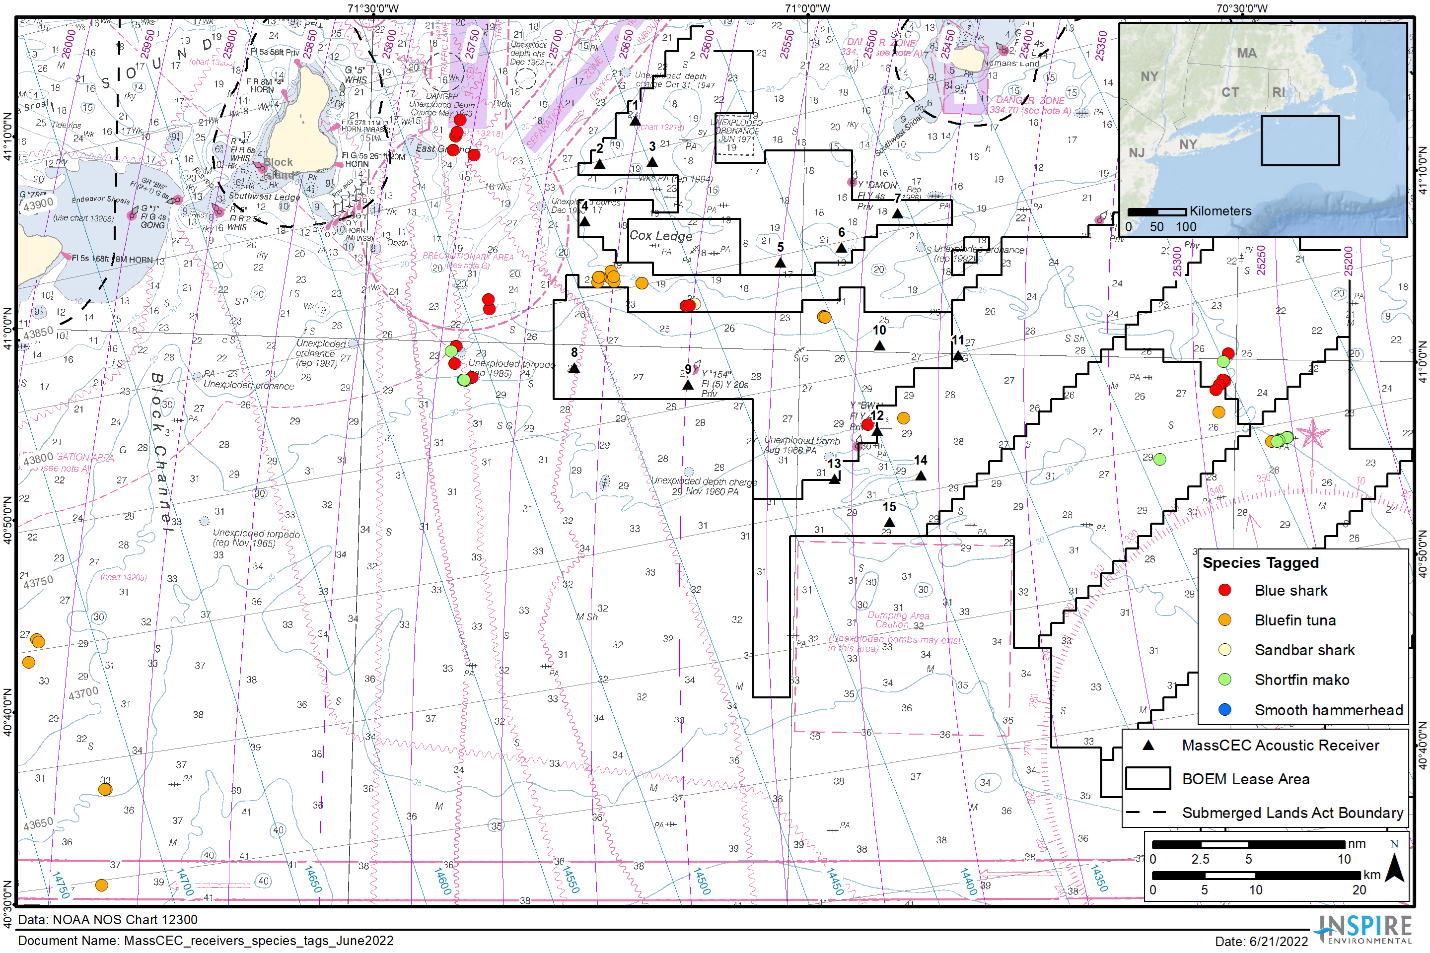 Map of the study site showing the location of the 15 acoustic receiver stations (black triangles) and the locations where 60 fish were tagged (colored circles). 